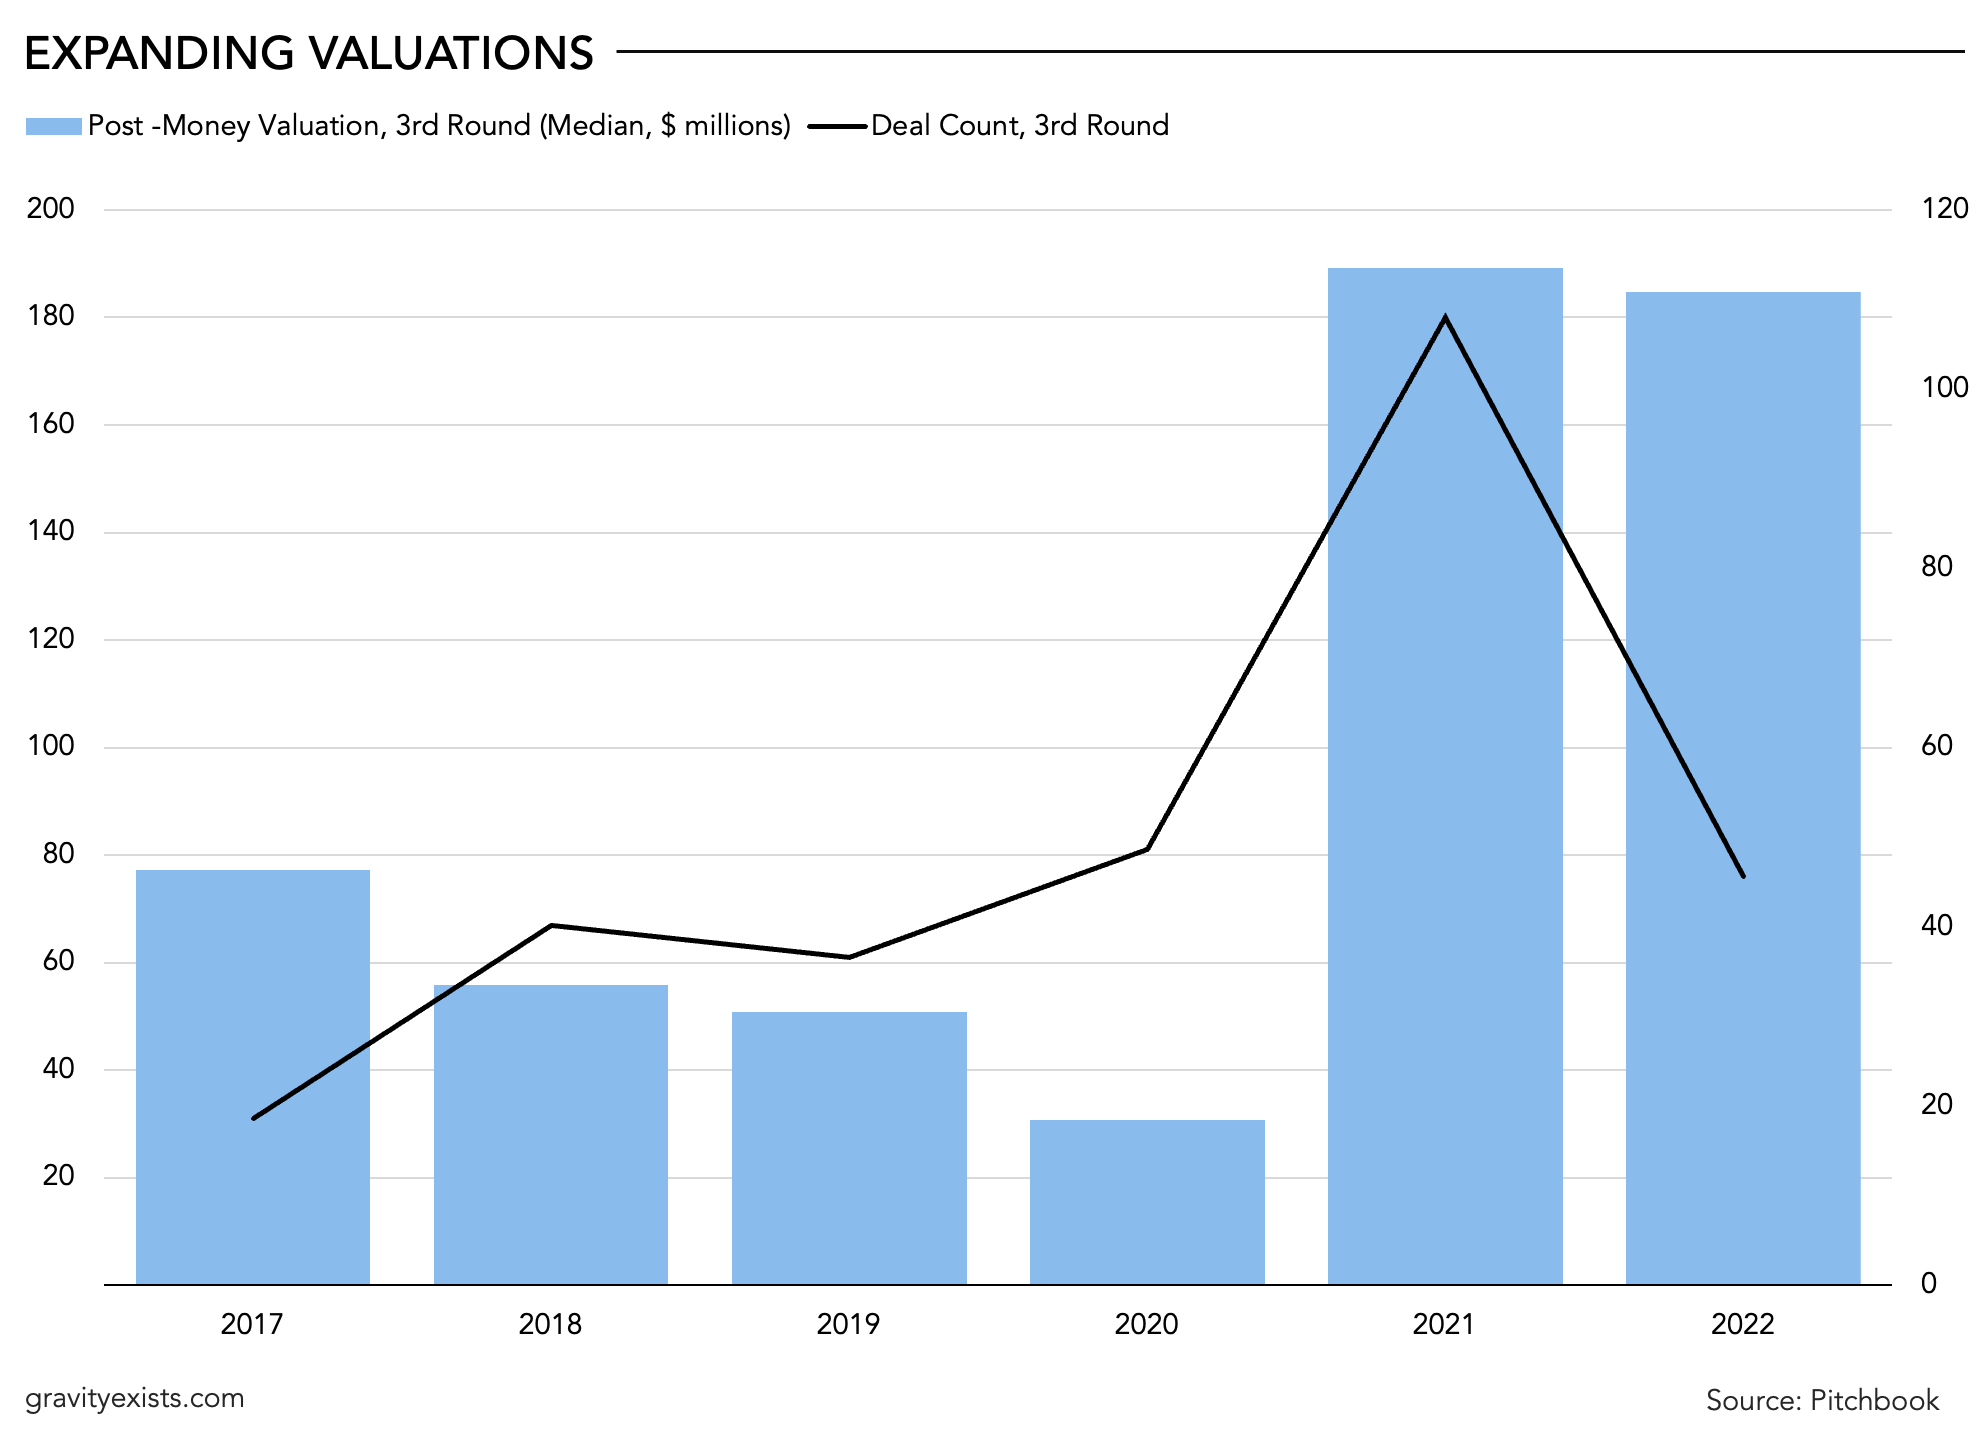 As investment capital flowed into the crypto space at a record pace last year, valuations rose sharply. Despite a drawdown of over $1 trillion in November of last year for Crypto market cap in aggregate, the enthusiasm of venture capitalists is undiminished. According to data from Pitchbook, VCs invested over $5 billion into crypto and blockchain companies during the first quarter of 2022.